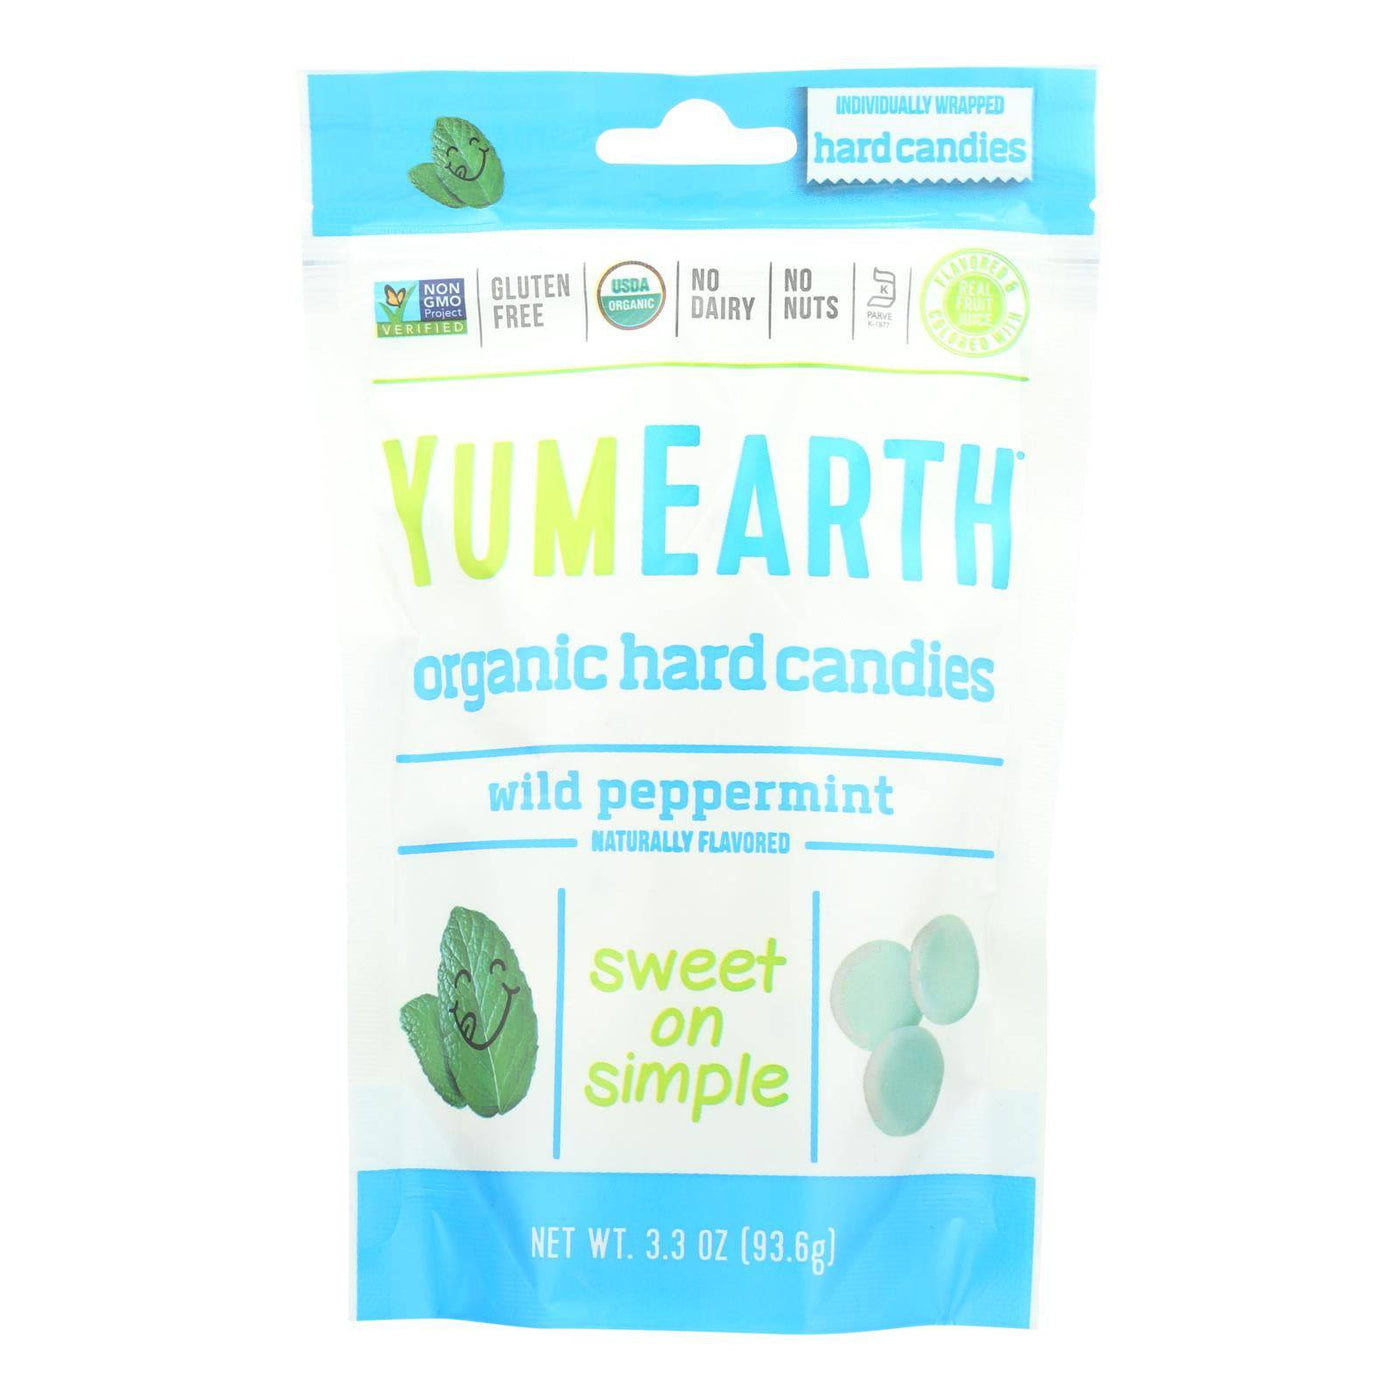 Yummy Earth Organic Candy Drops Wild Peppermint - 3.3 Oz - Case Of 6 | OnlyNaturals.us